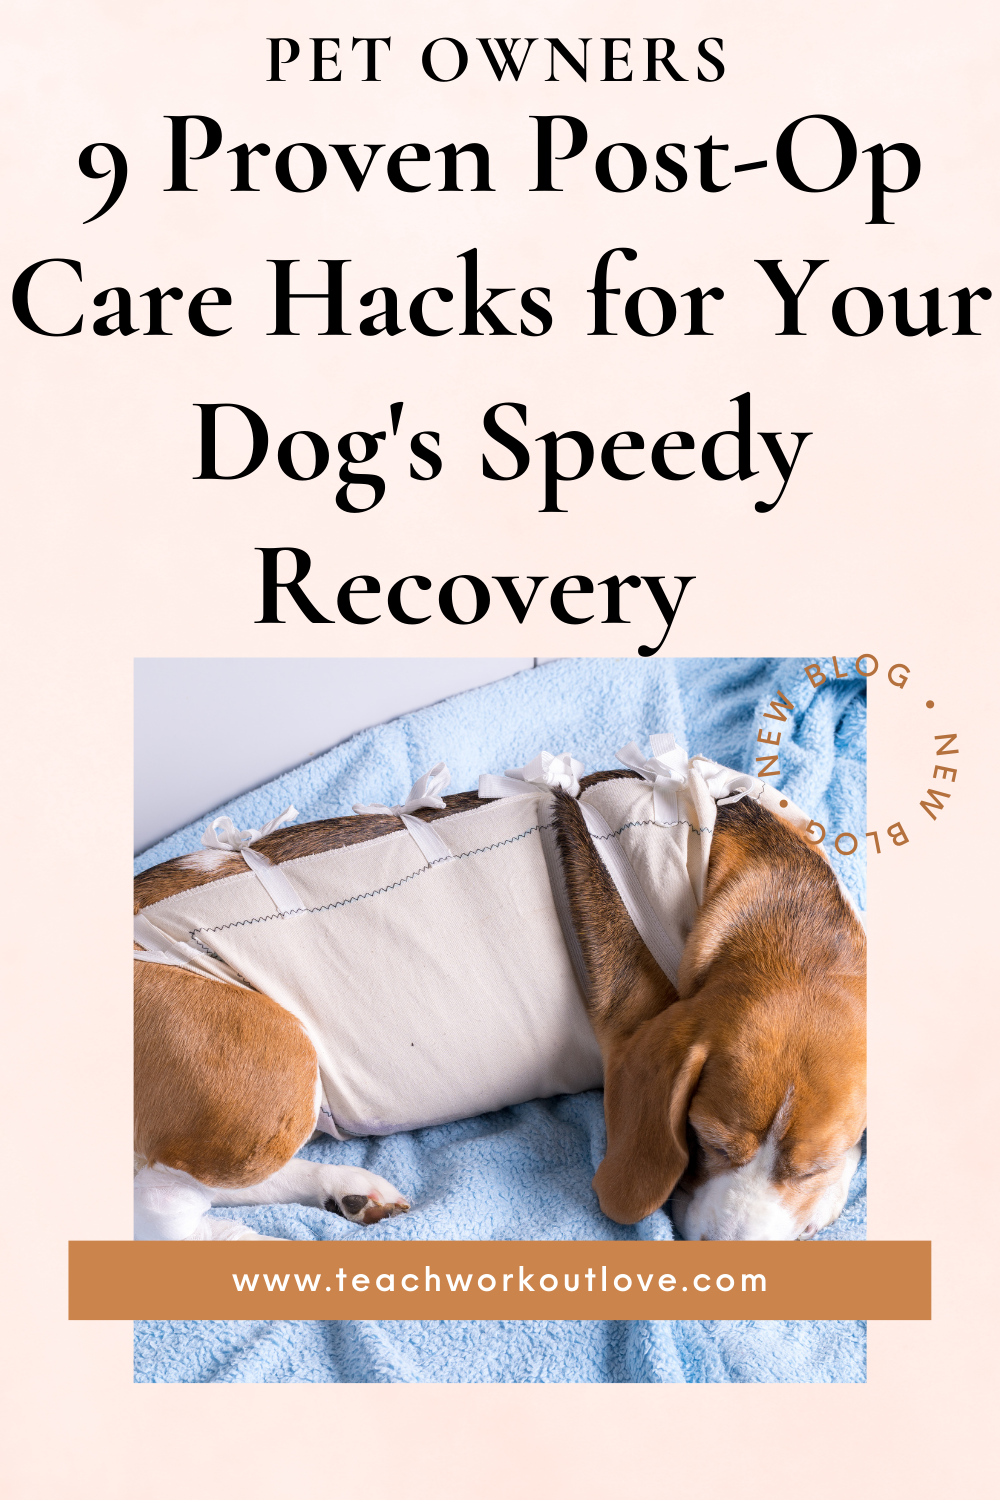 Is your dog having surgery? In this article, we will tell you some important caring tips for your furry friend after undergoing leg surgery.